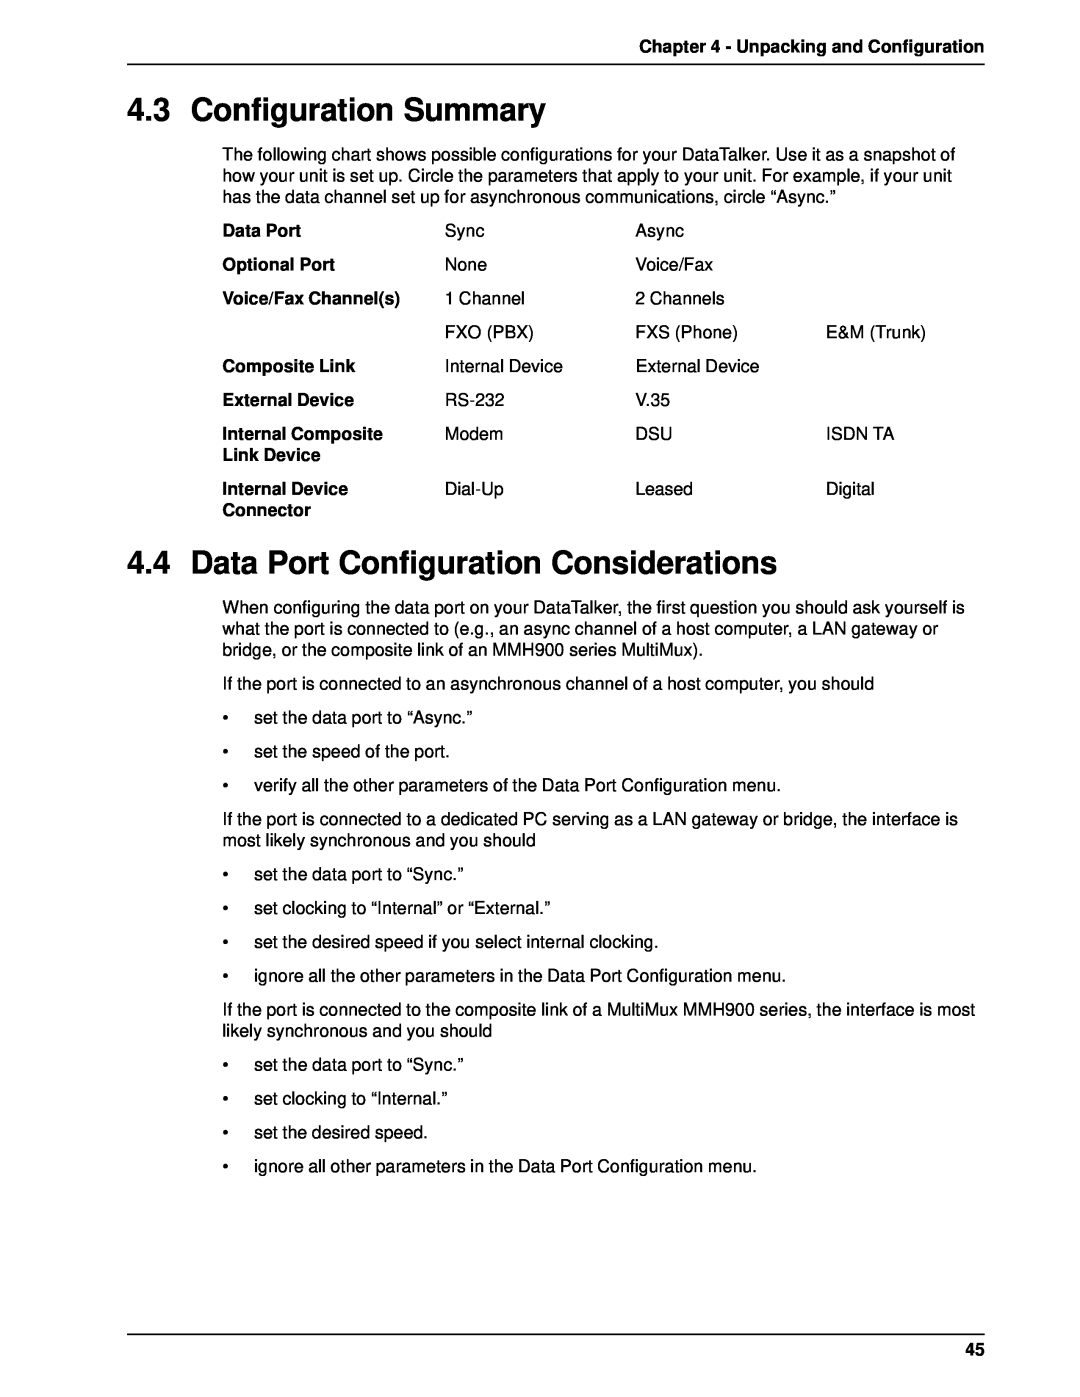 Multi-Tech Systems DT102, DT101 Configuration Summary, Data Port Configuration Considerations, Unpacking and Configuration 